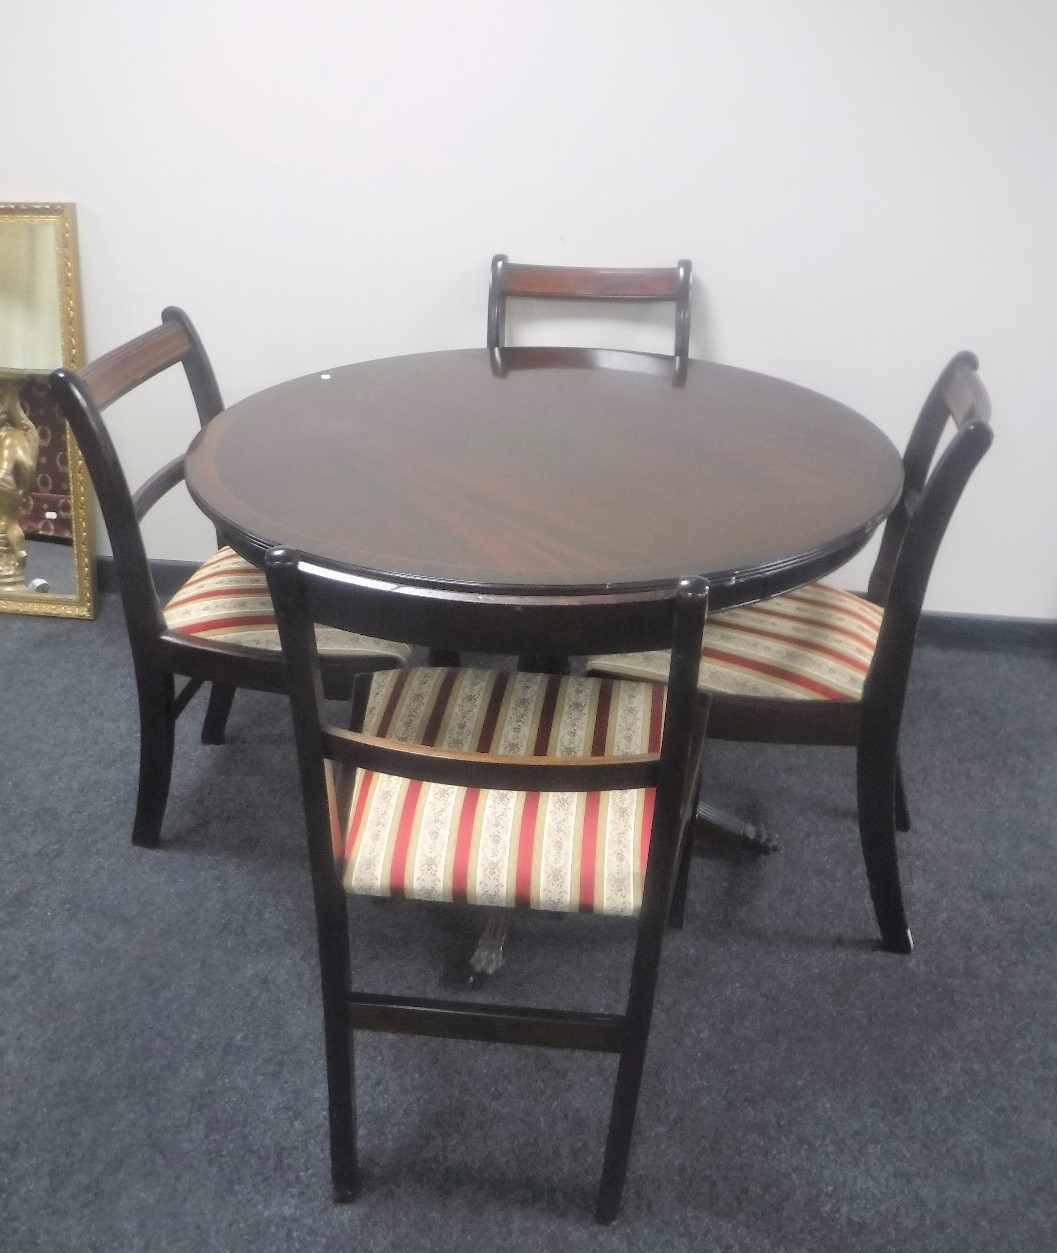 A circular inlaid mahogany Regency style pedestal dining table with four chairs